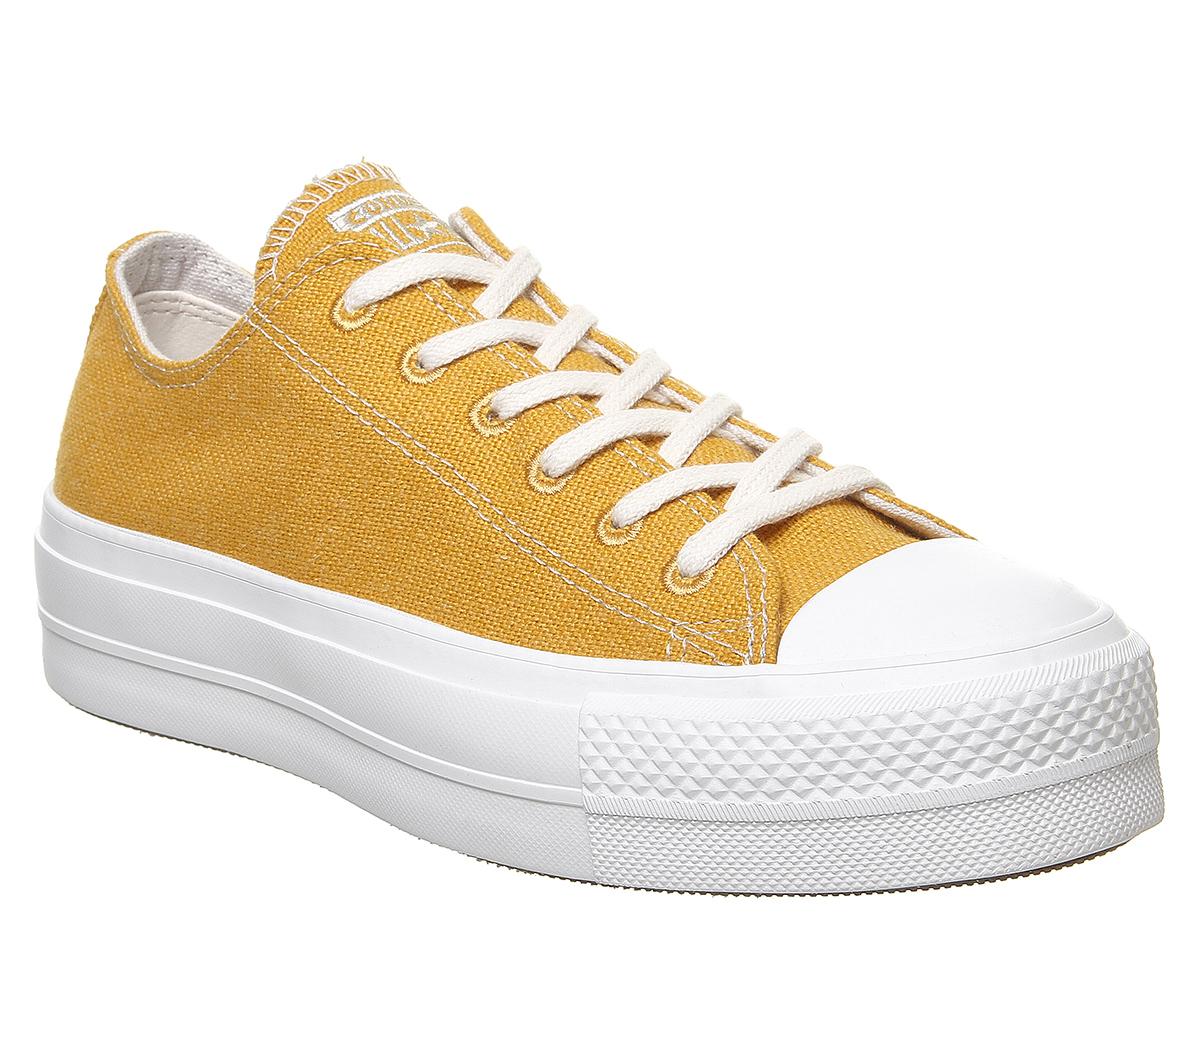 Converse All Star Low Platform Trainers 